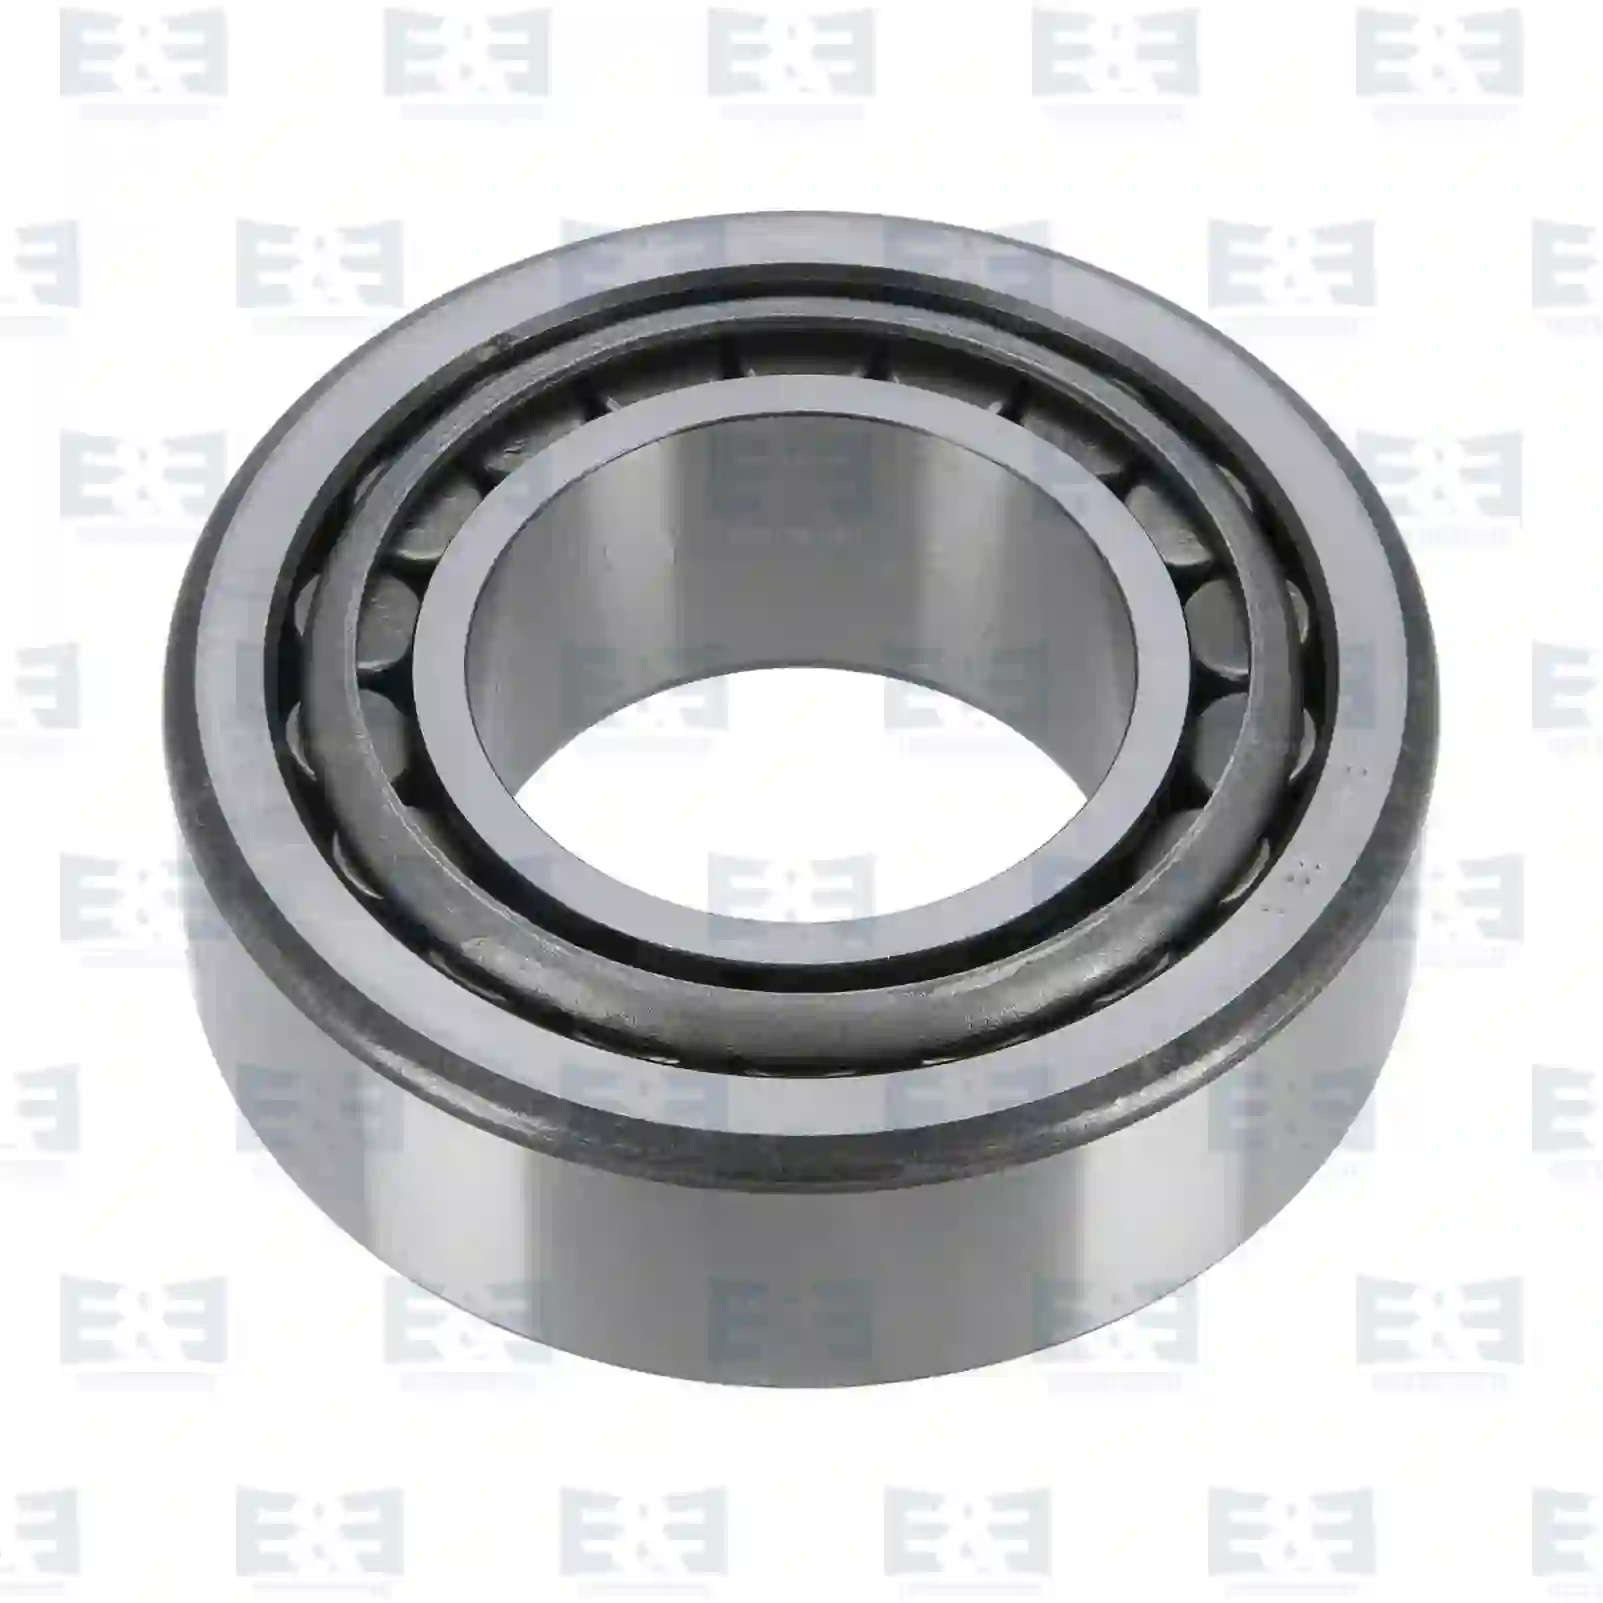 Hub Tapered roller bearing, EE No 2E2284033 ,  oem no:7421660722, 7422283632, 392039, 1654320, 184650, 20901349, 21660722, 22283632, ZG02975-0008 E&E Truck Spare Parts | Truck Spare Parts, Auotomotive Spare Parts